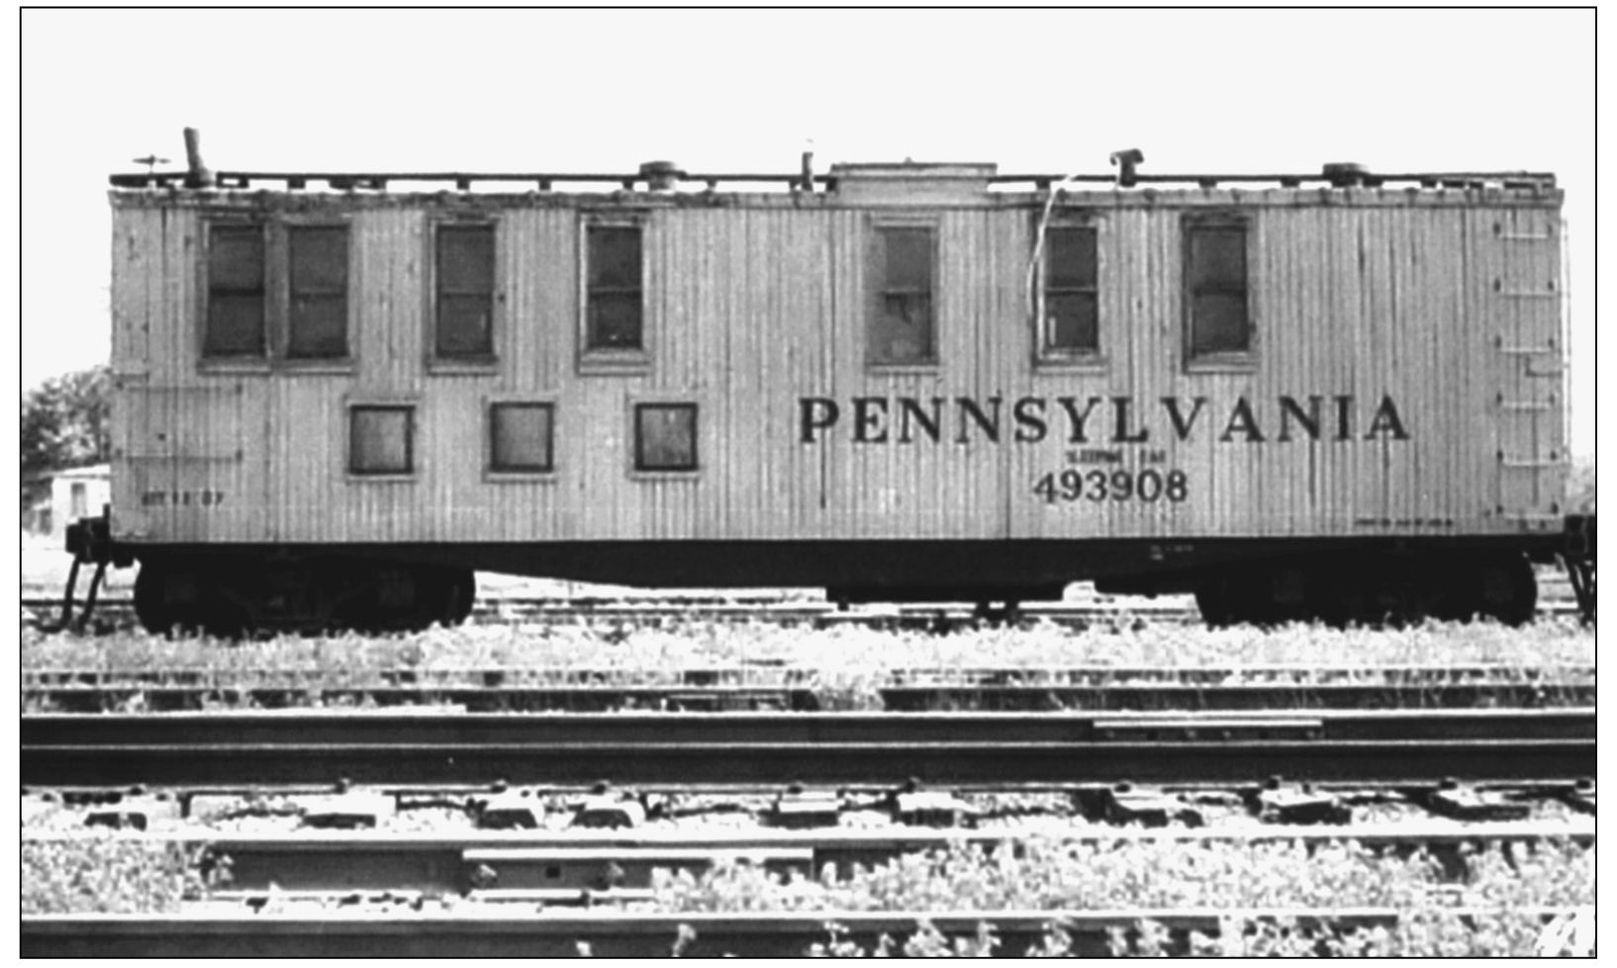 This is a Pennsylvania Railroad worksleeping car as it looked on May 3 1959 - photo 5